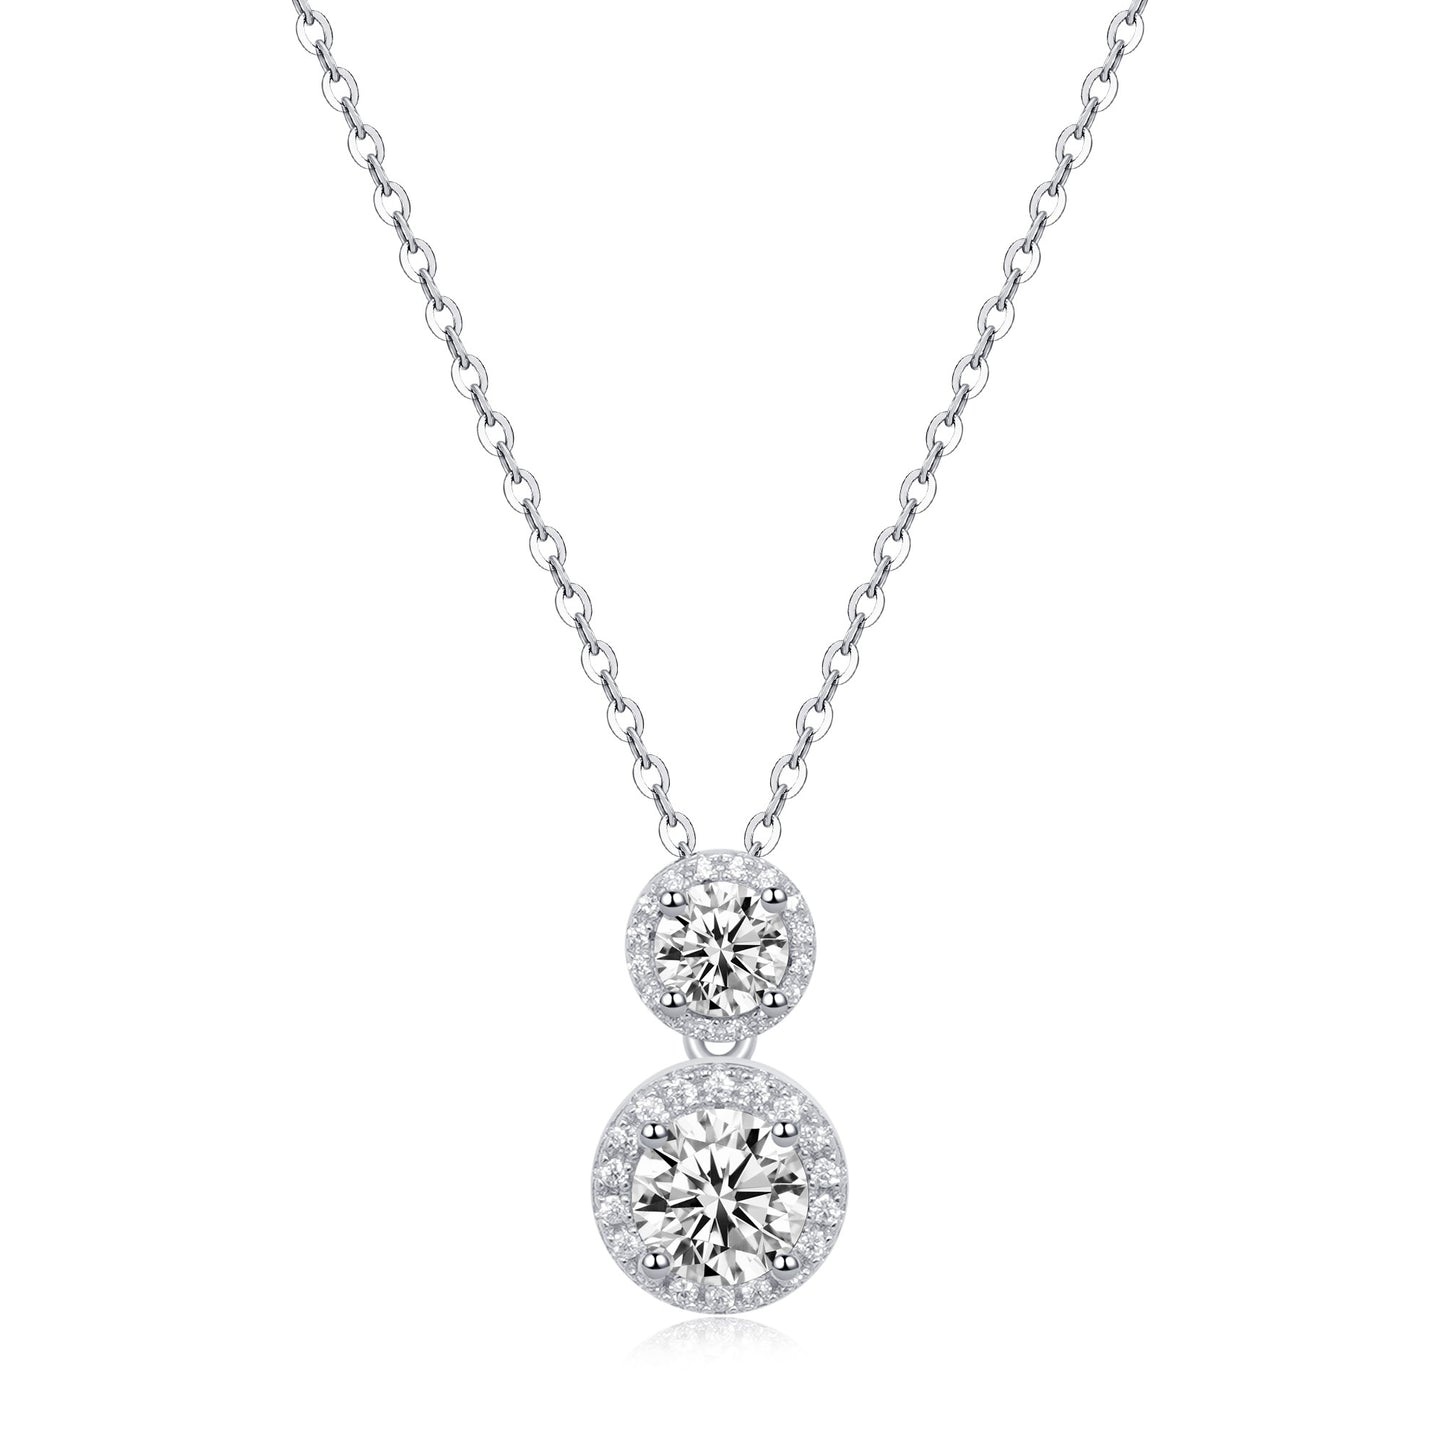 【#19】(Corona Necklace)925 Sterling Silver Moissanite necklace